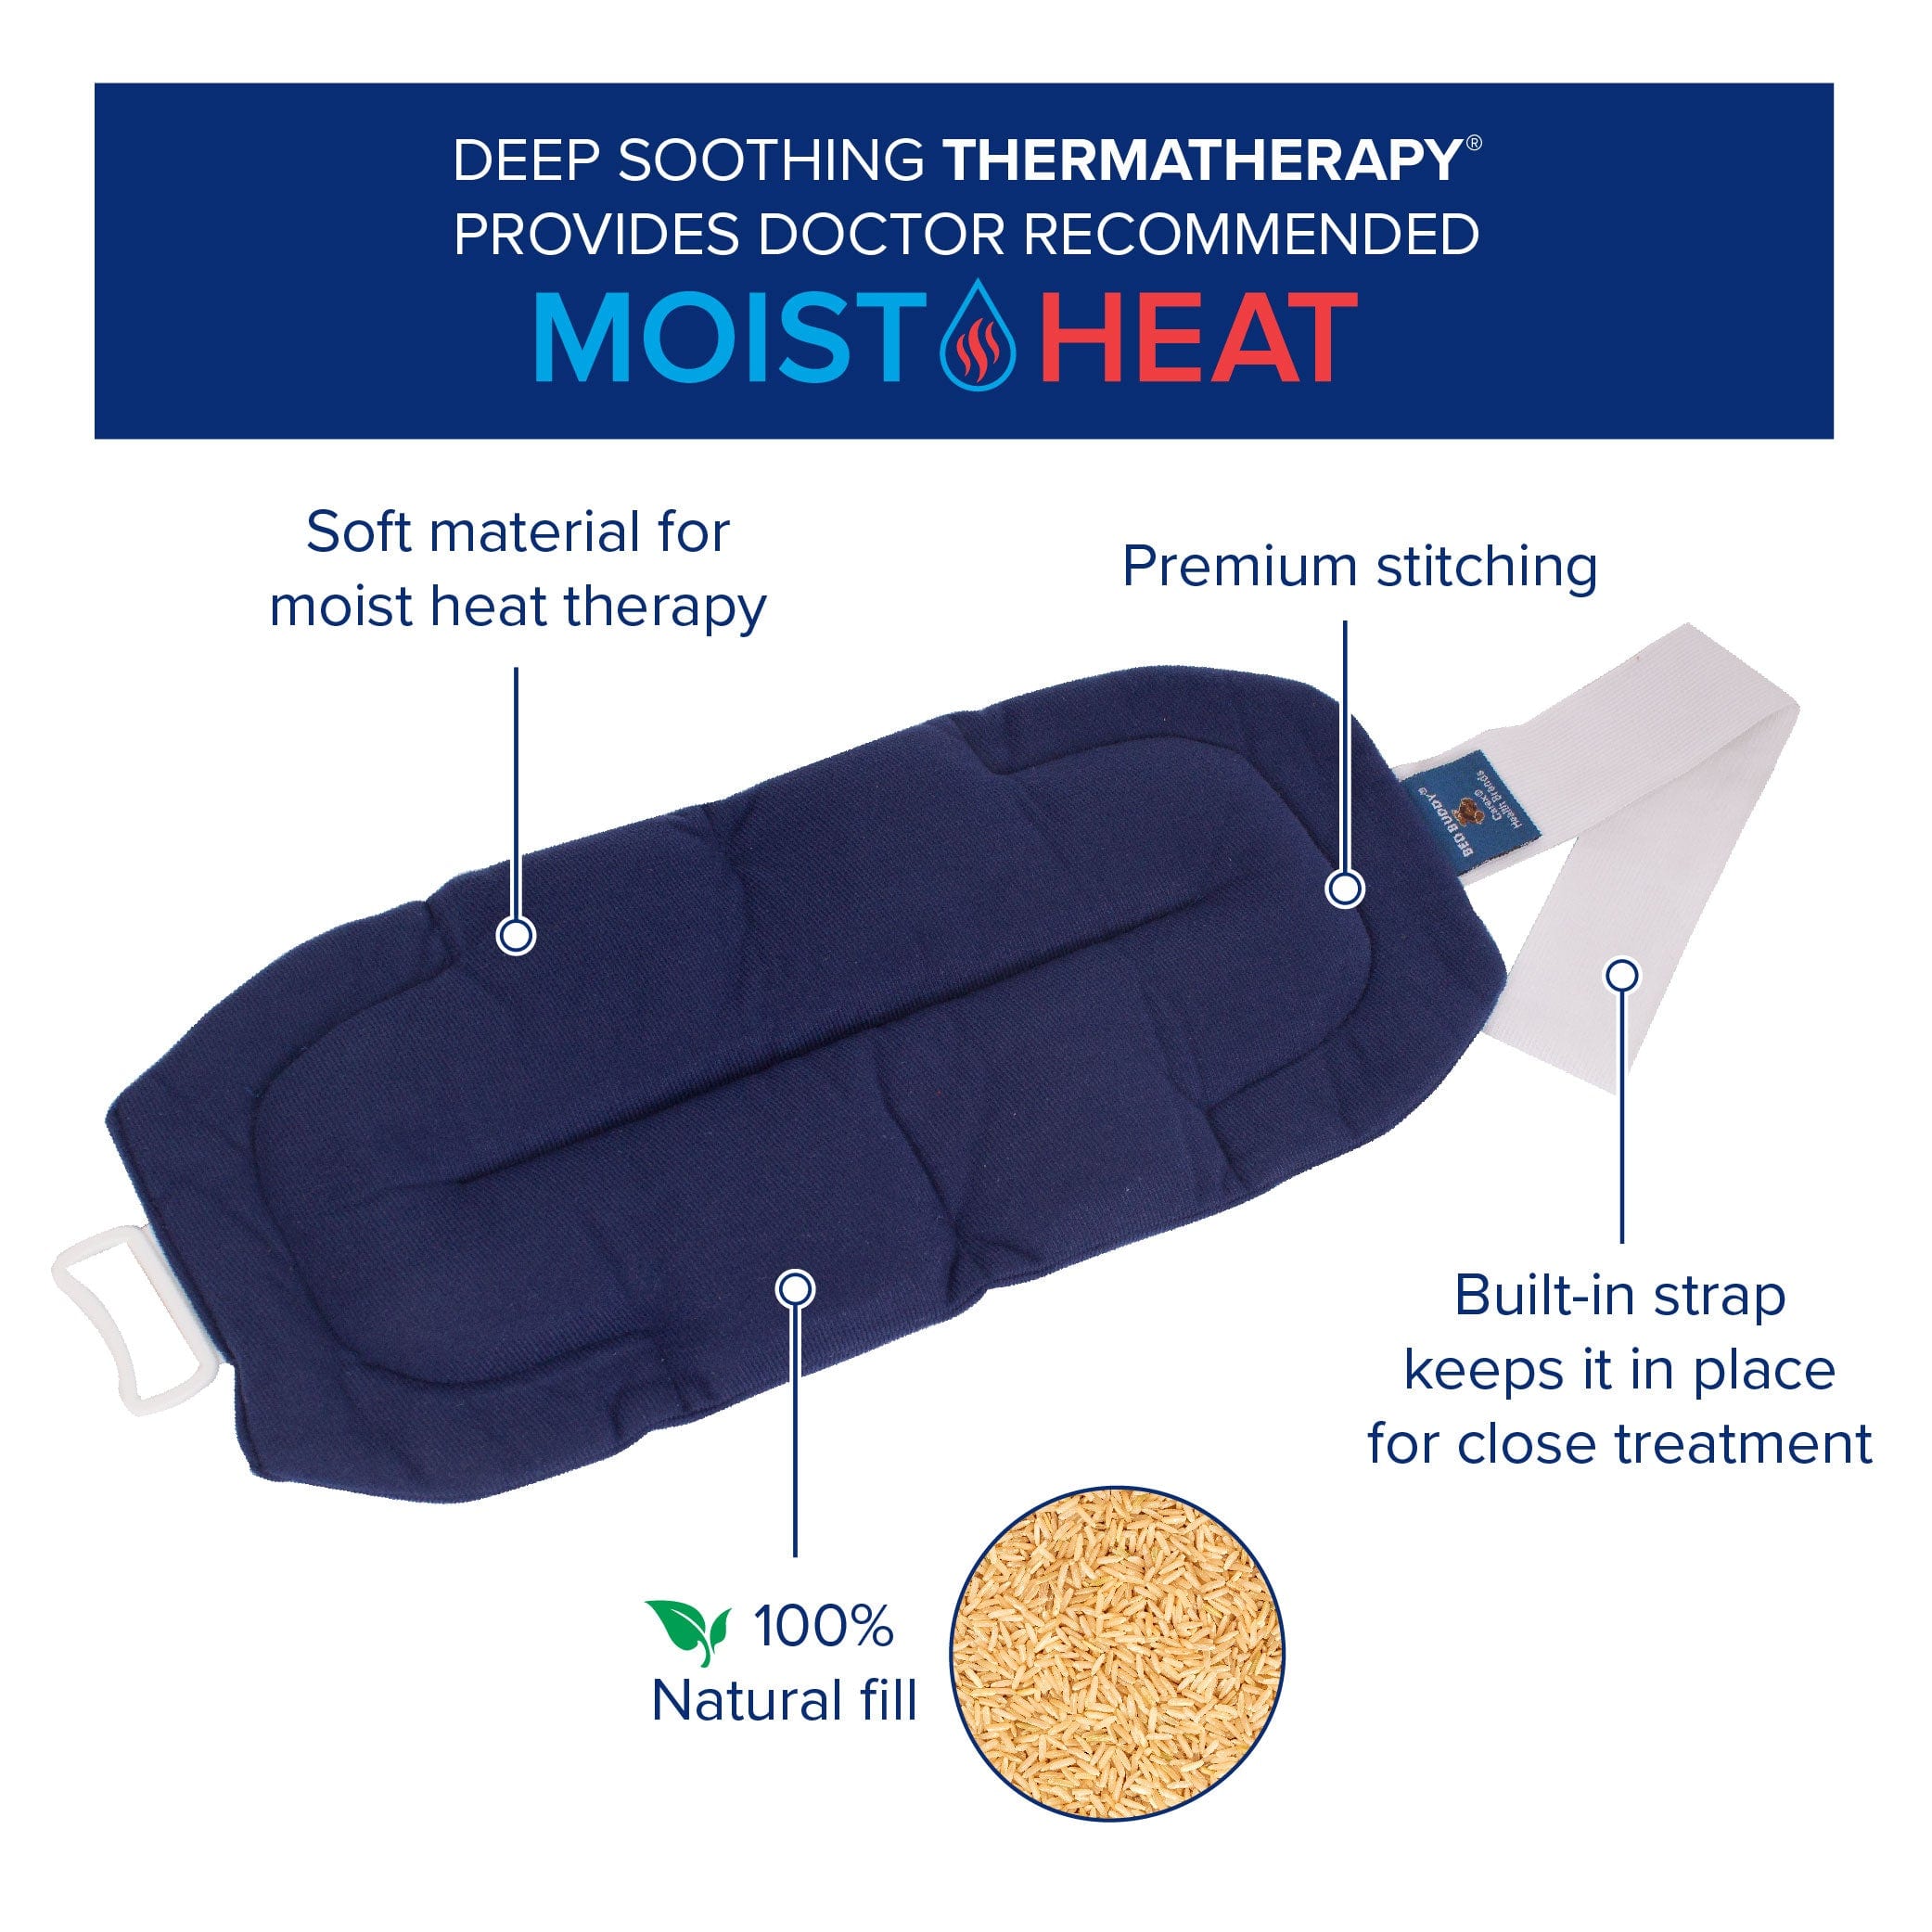 Bed Buddy Back Wrap - Deep soothing thermatherapy provides doctor recommended moist heat